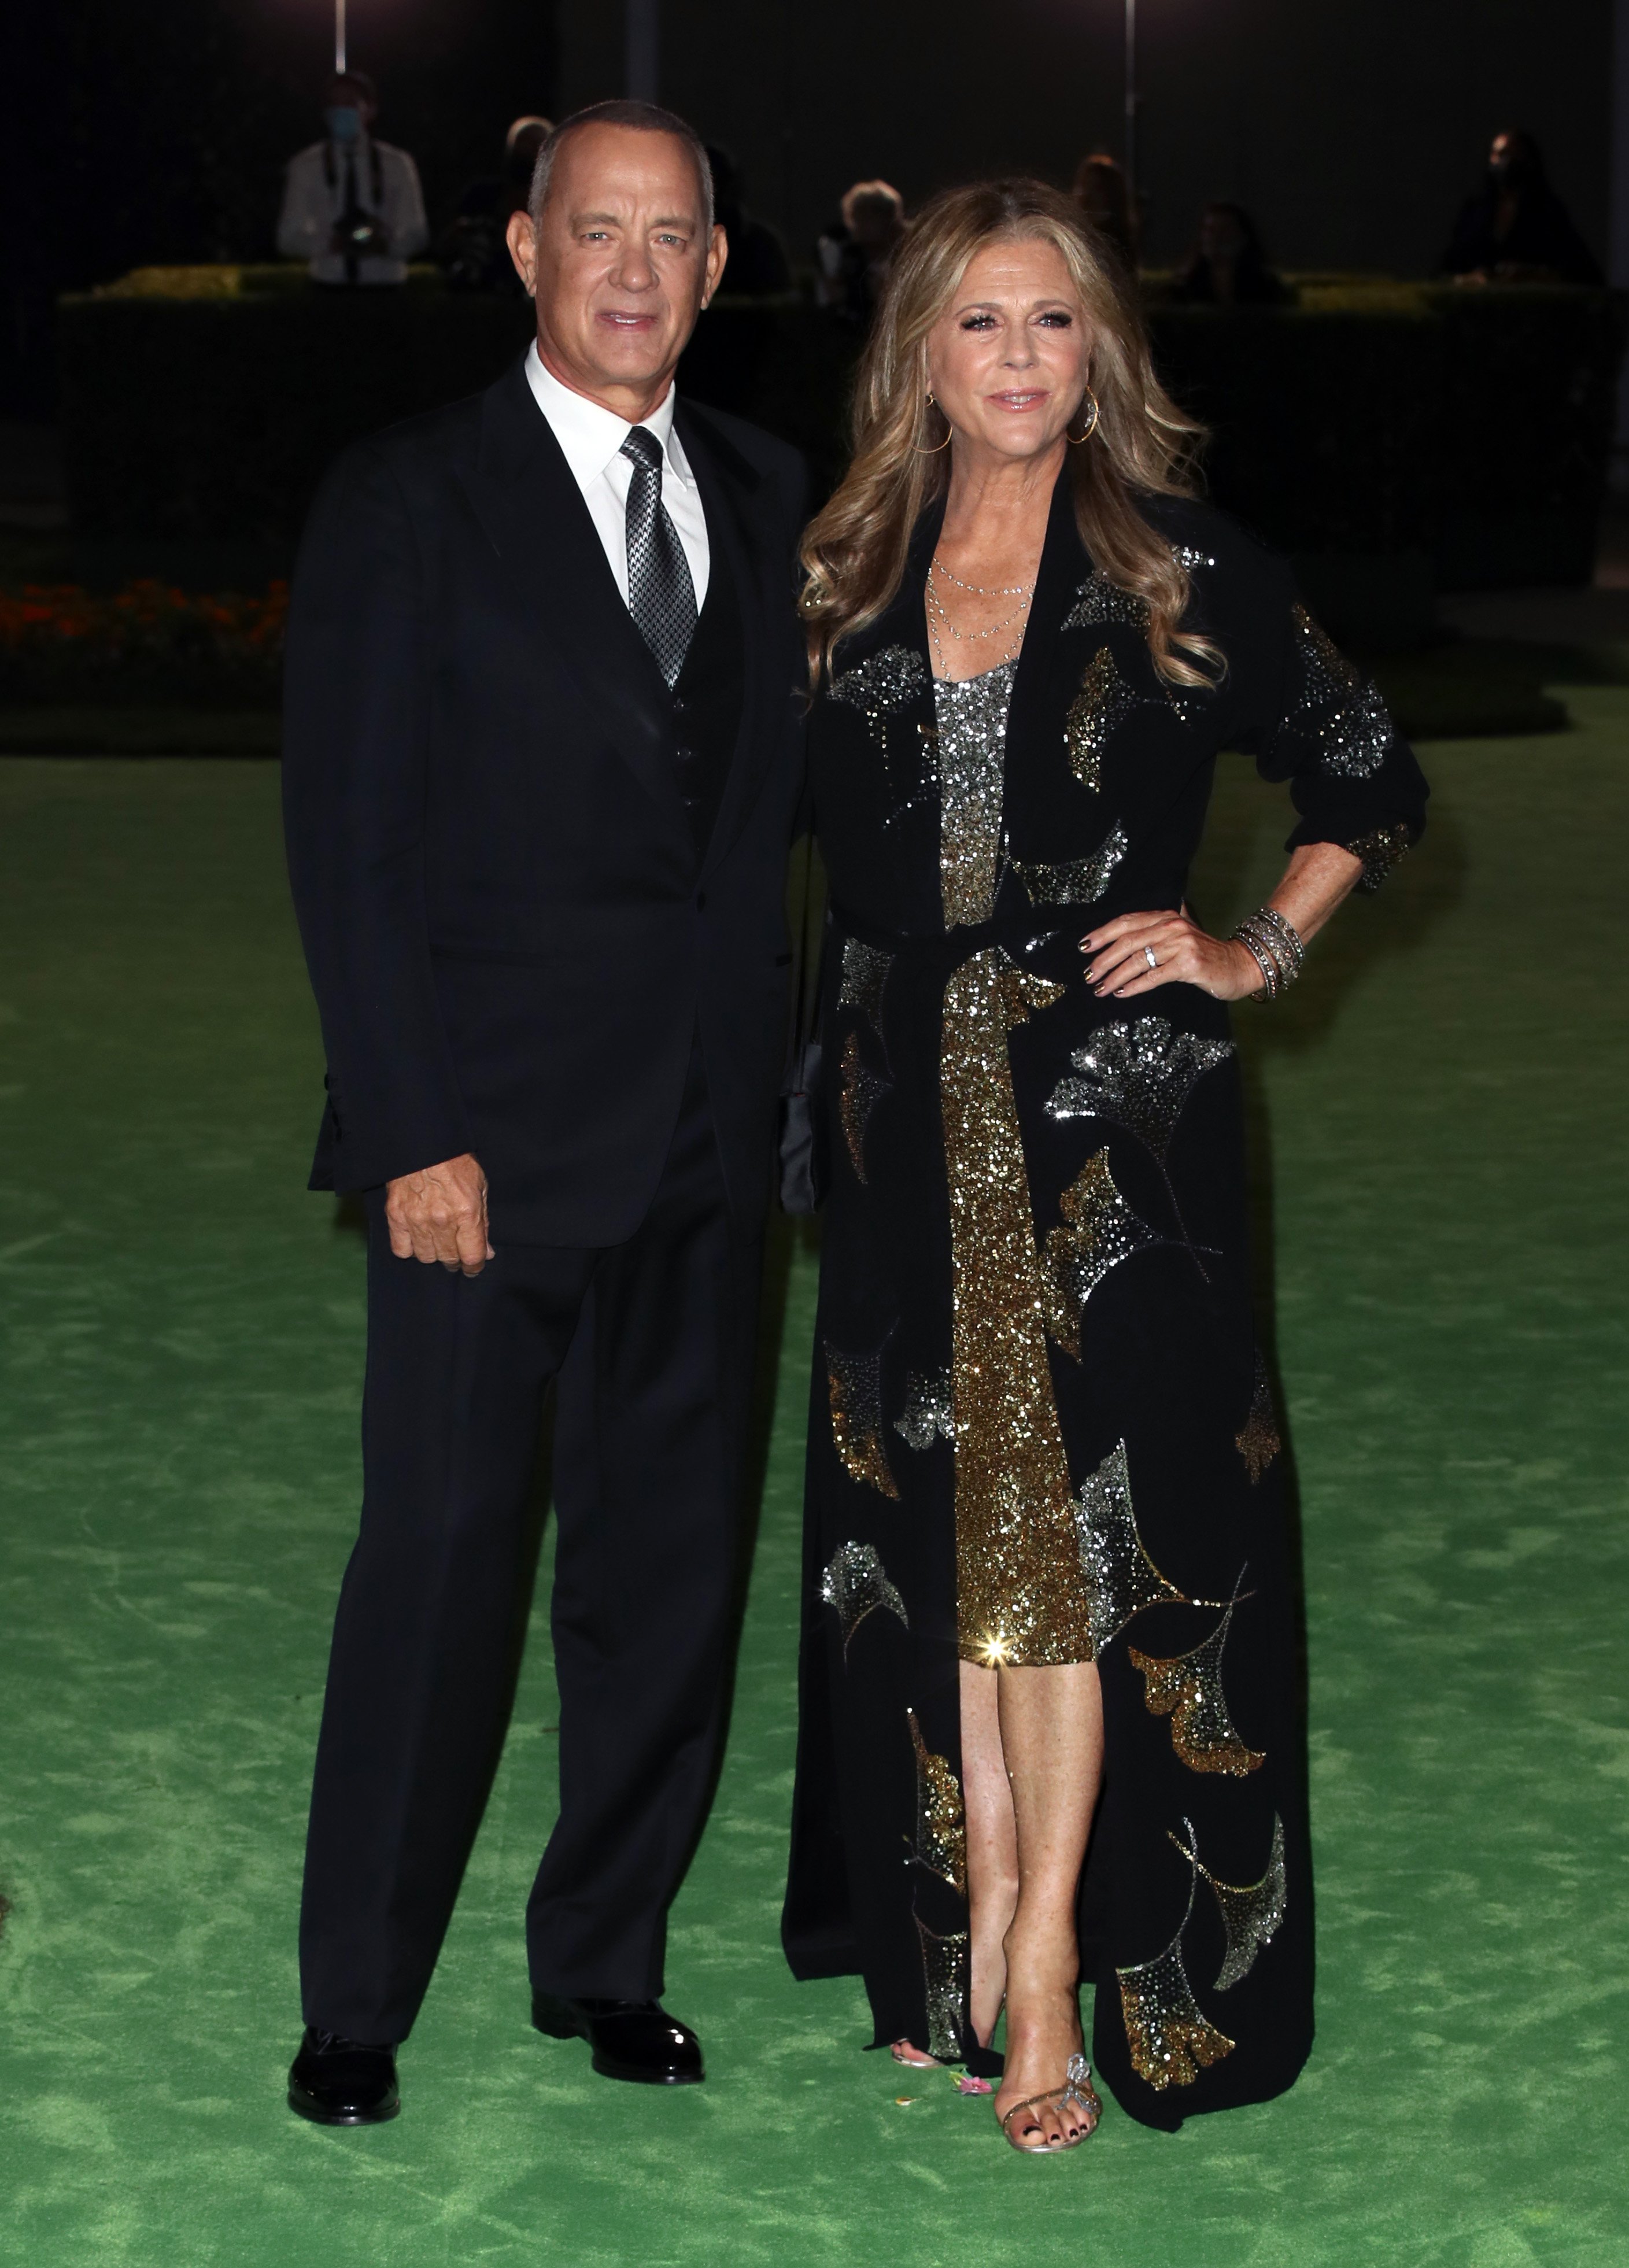 Tom Hanks and Rita Wilson attend The Academy Museum of Motion Pictures Opening Gala at Academy Museum of Motion Pictures on September 25, 2021 in Los Angeles, California | Source: Getty Images